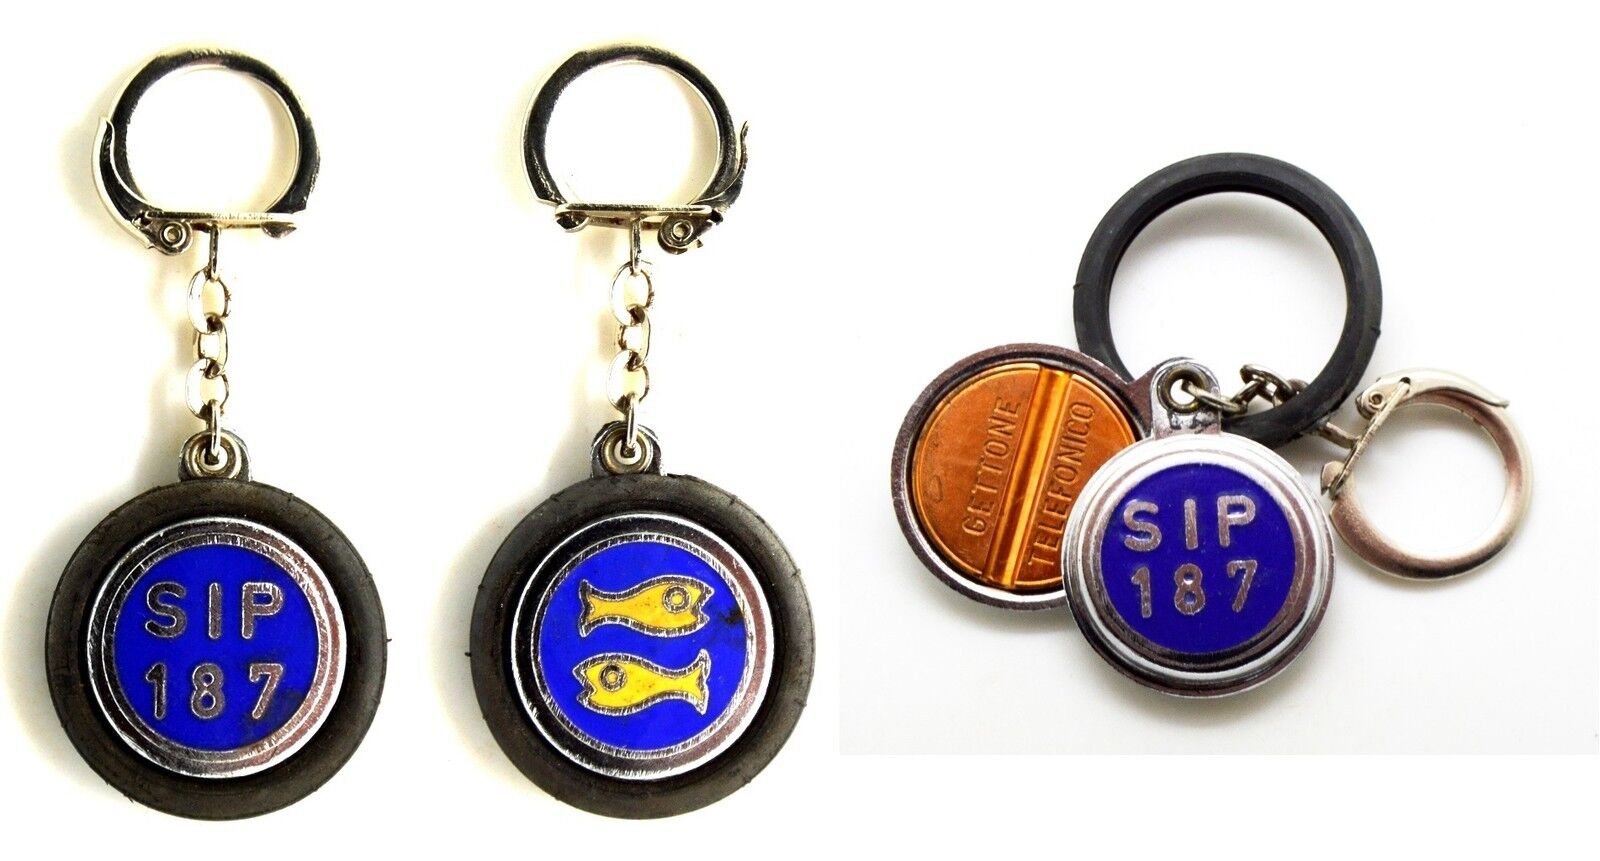 Keychain Sip 187 Opening With Token Telephone Inside - Fish Series Zo